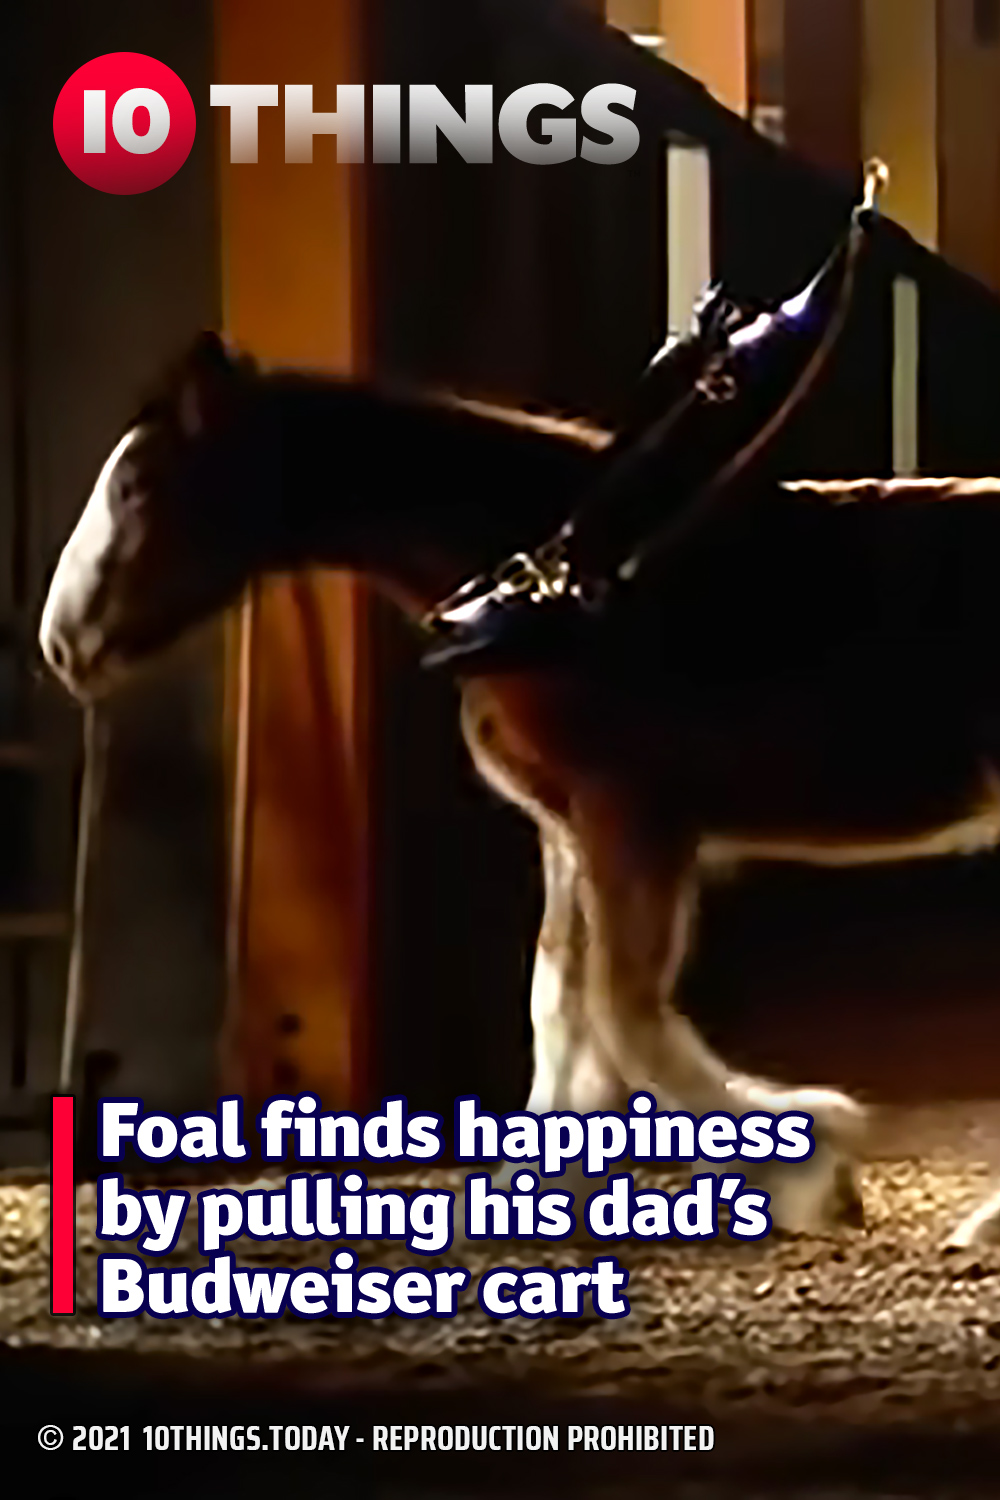 Foal finds happiness by pulling his dad’s Budweiser cart